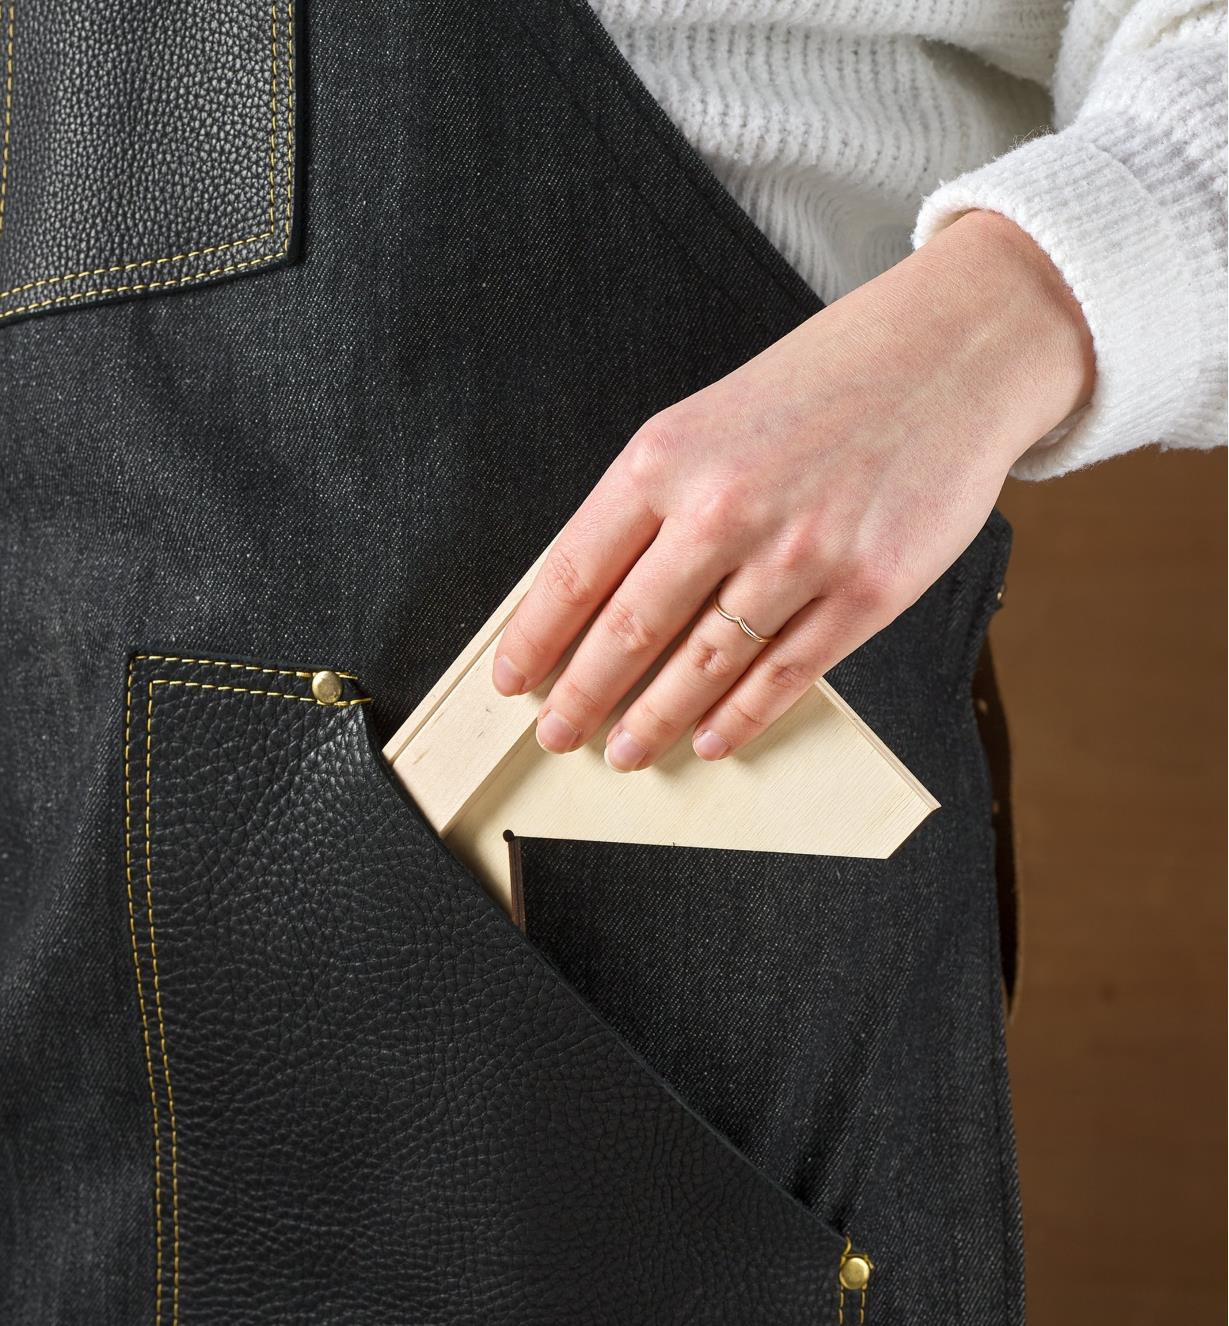 A Crucible bench square is placed in the pocket of a black apron